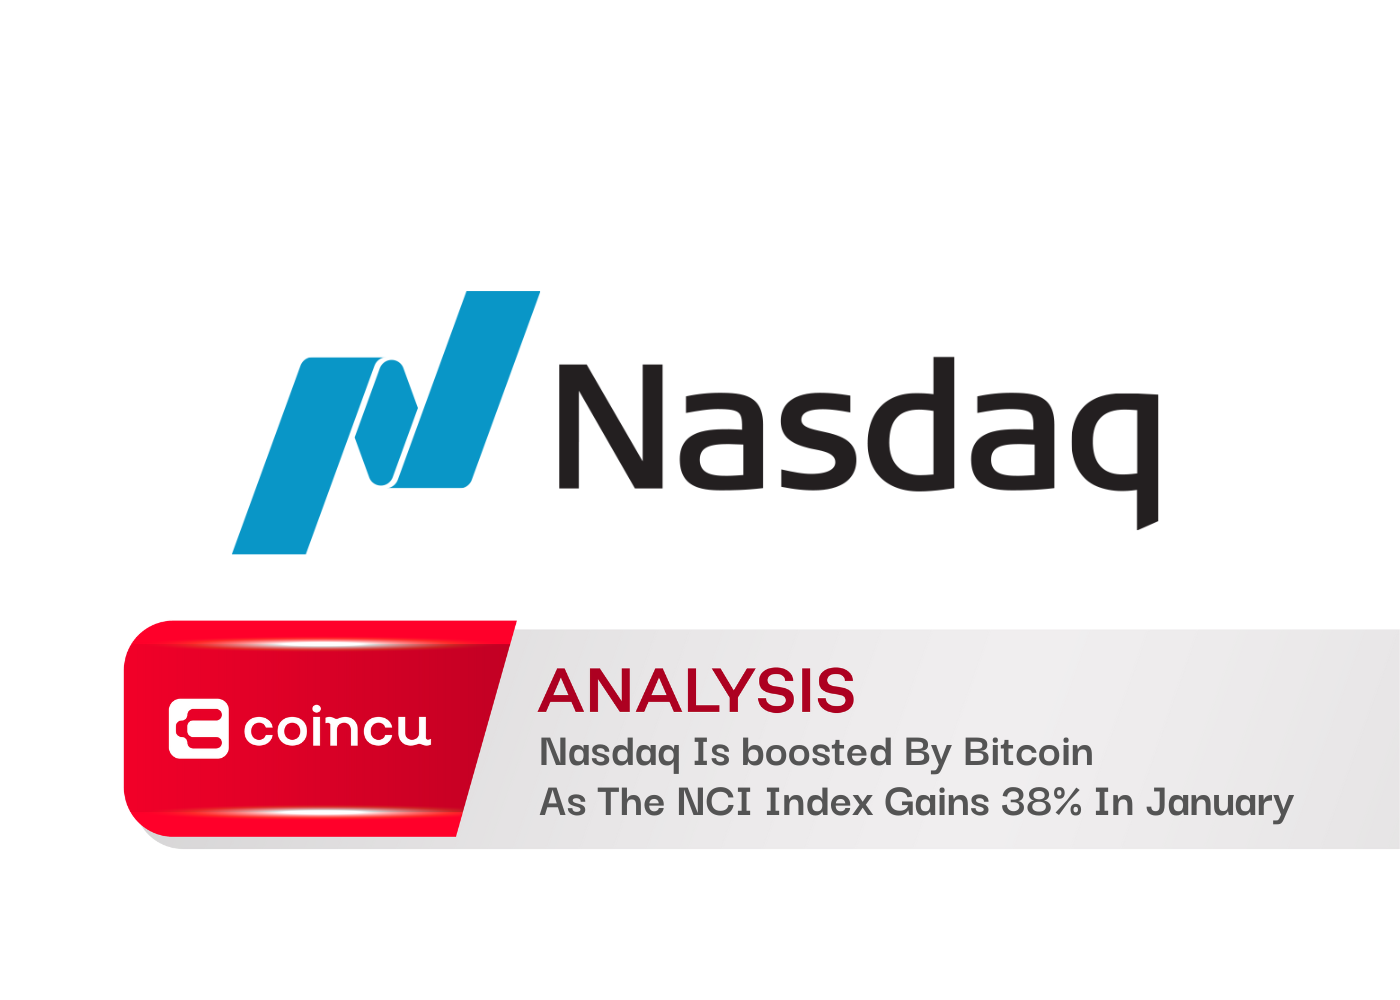 Nasdaq Is boosted By Bitcoin